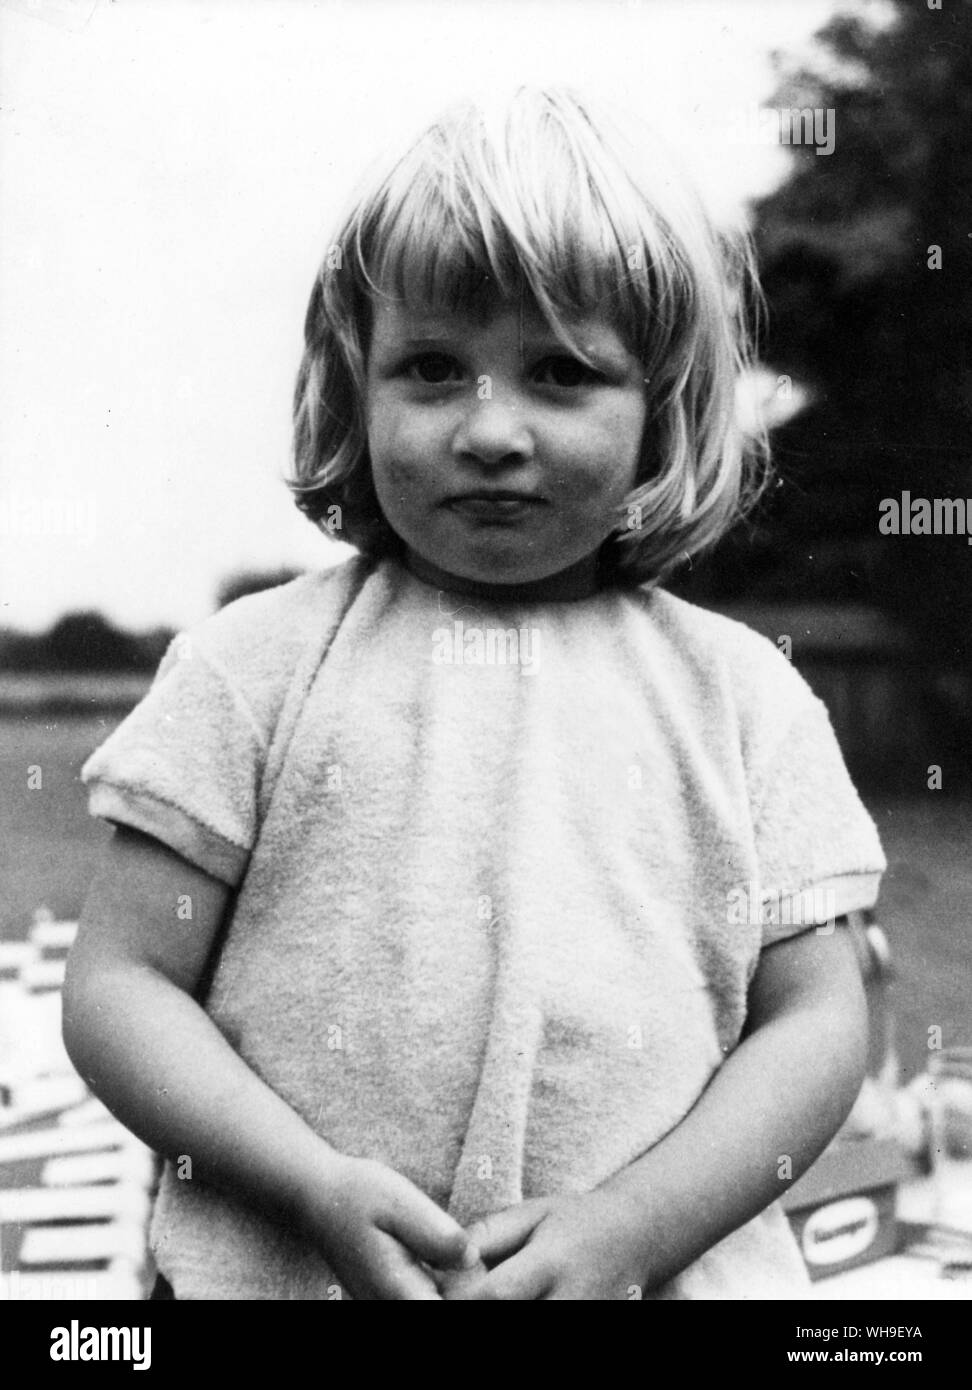 Lady Diana Spencer (1961-1997), aged 2 years. She wed Charles Prince of Wales in July 1991 to become Princess Diana. She separated and later divorced from him. Stock Photo